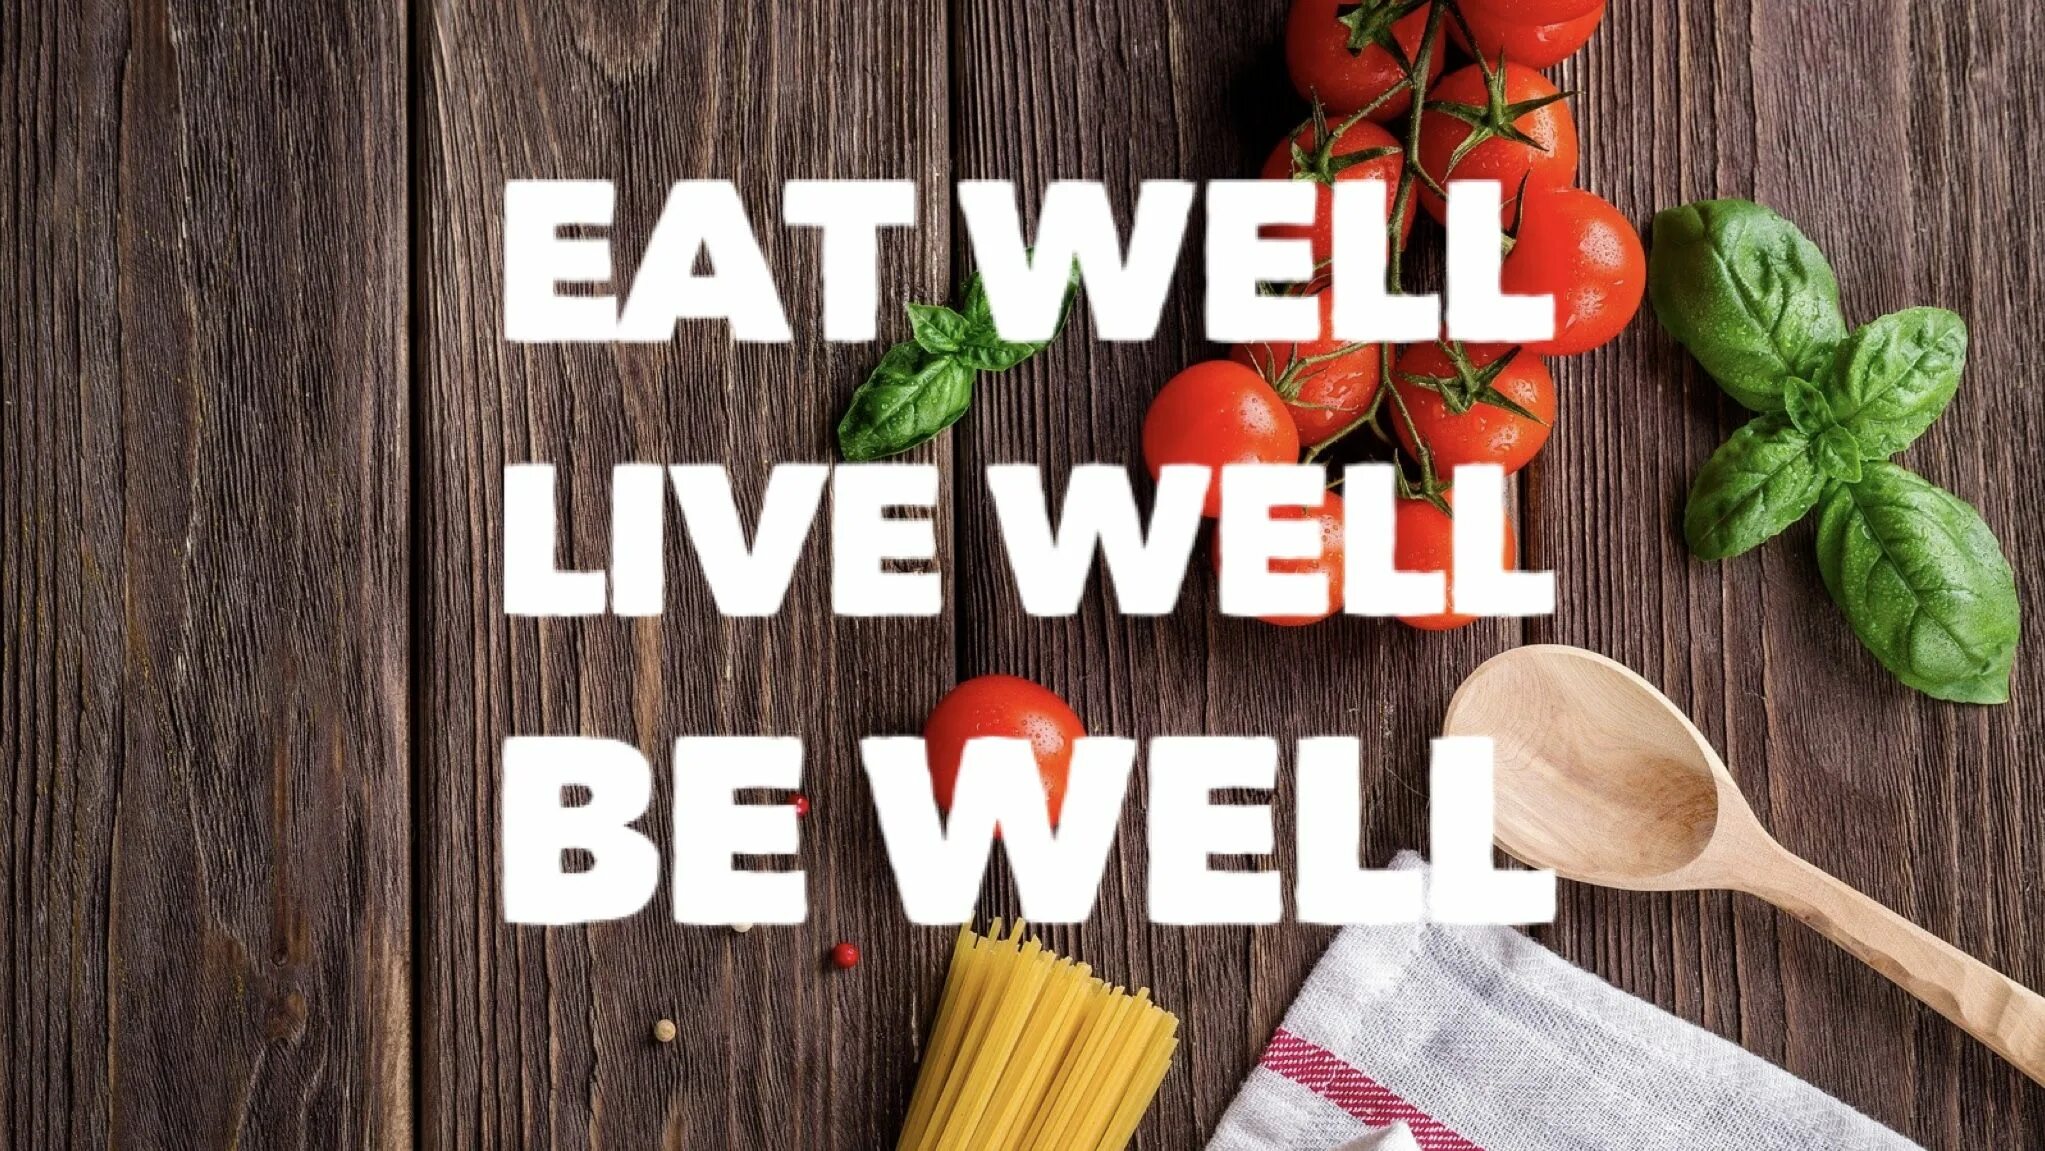 How to live better. Eat well Live well. Постер eat well Live well. Eat well Боровичи меню. Ивенты well to Live.